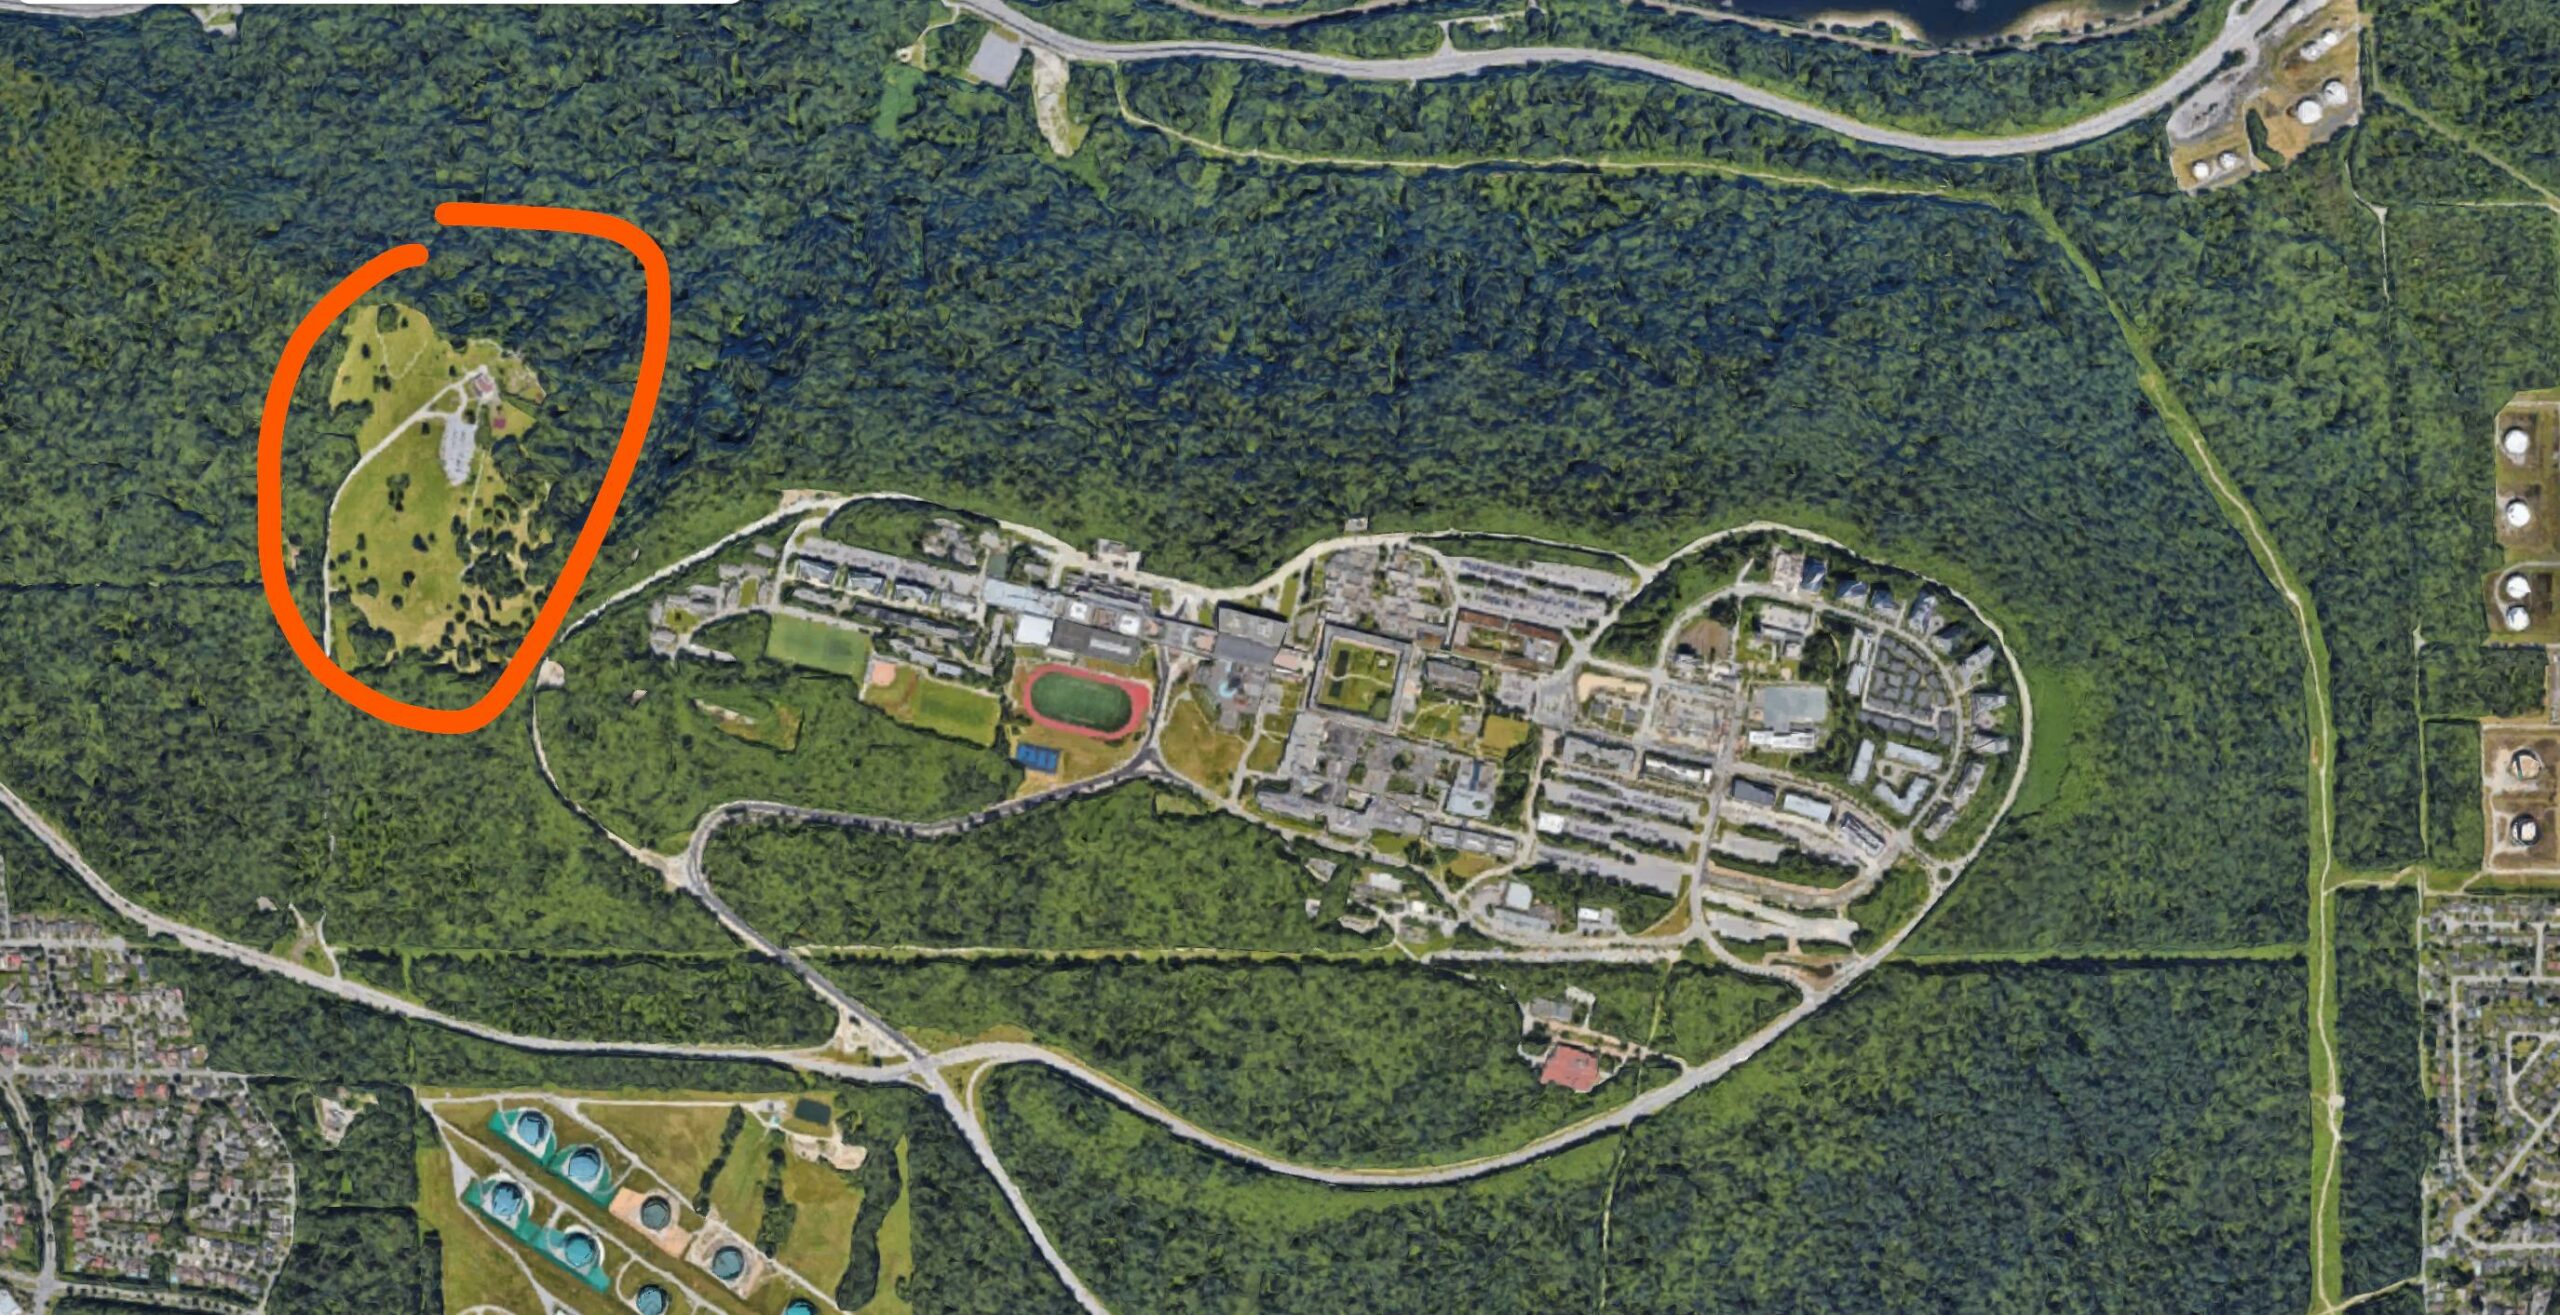 Satellite photo of Burnaby Mountain Conservation Area with parking lot encircled